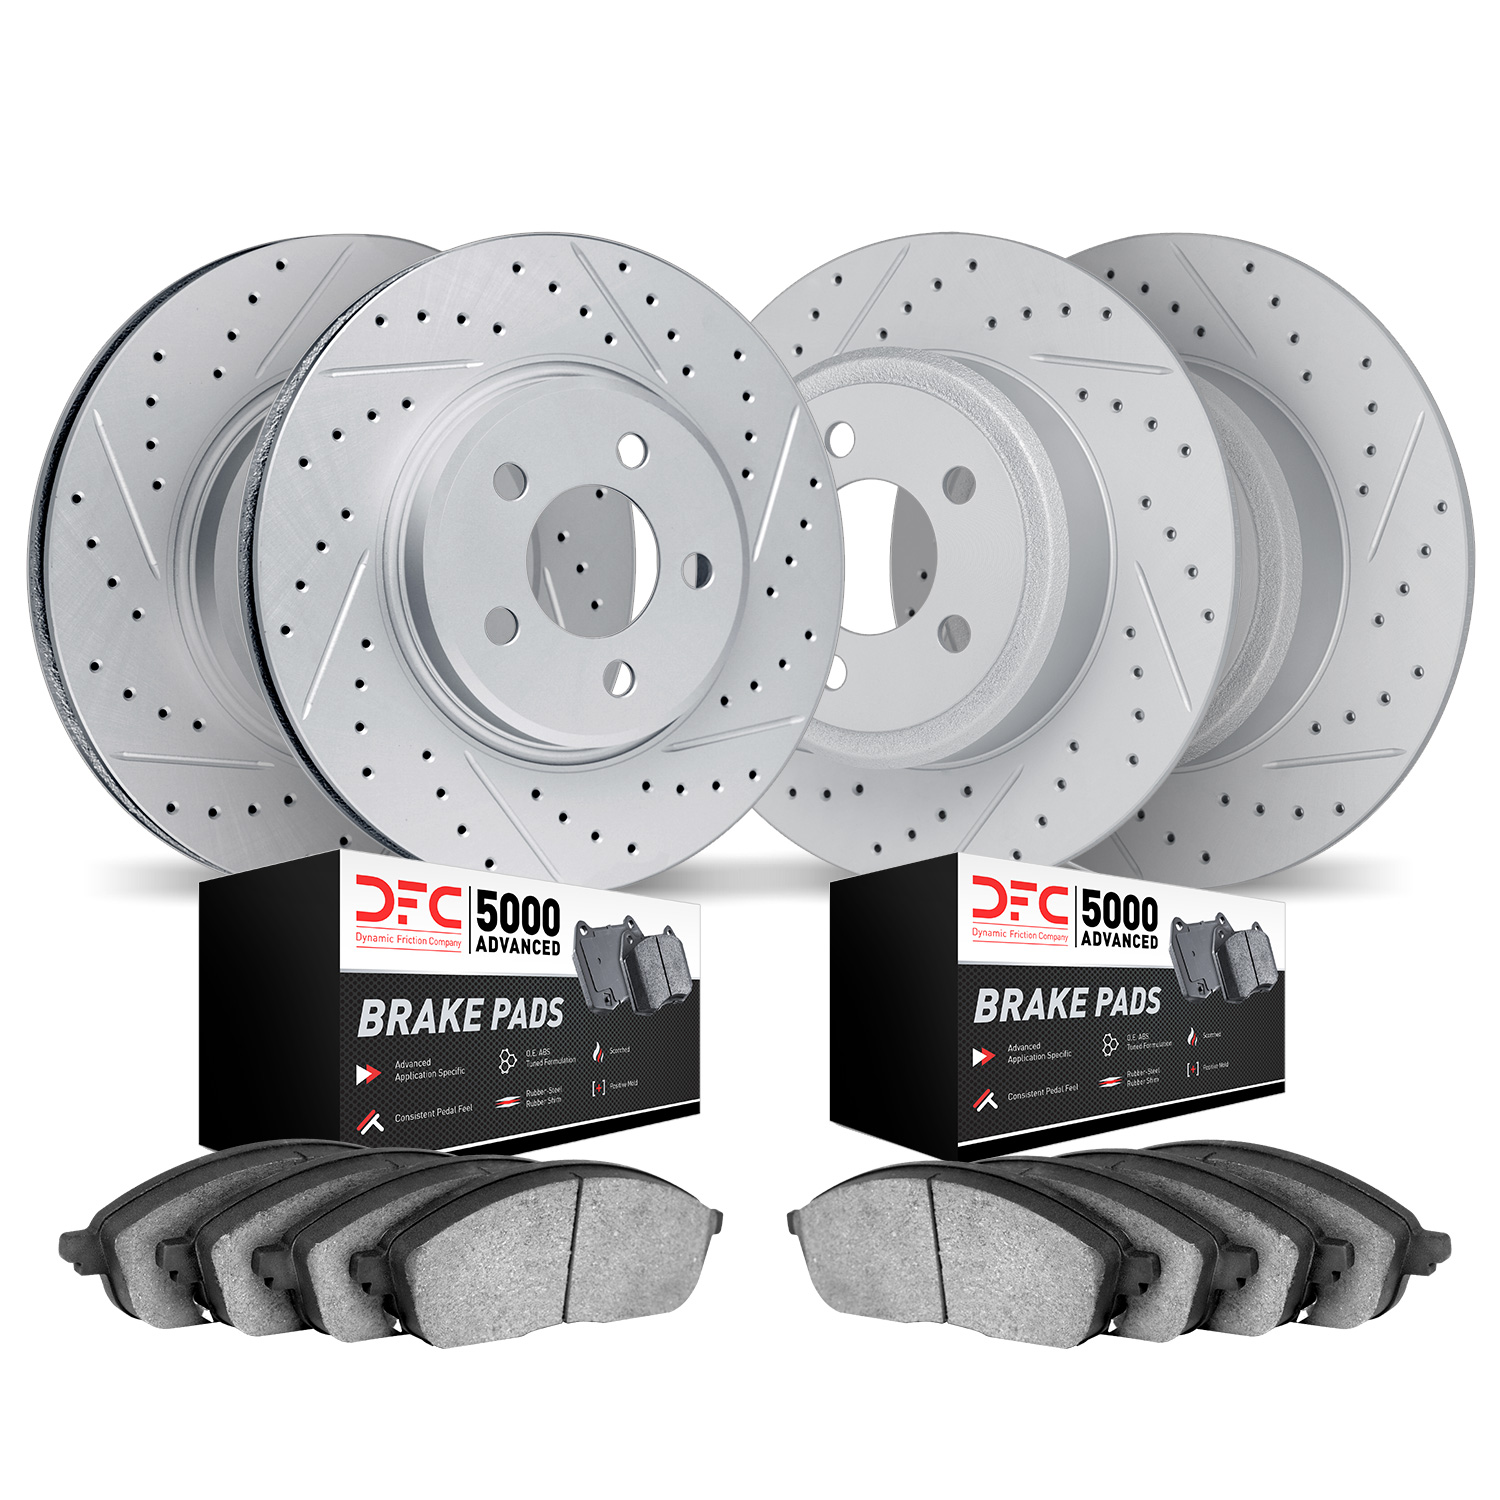 2504-76087 Geoperformance Drilled/Slotted Rotors w/5000 Advanced Brake Pads Kit, 2002-2006 Lexus/Toyota/Scion, Position: Front a